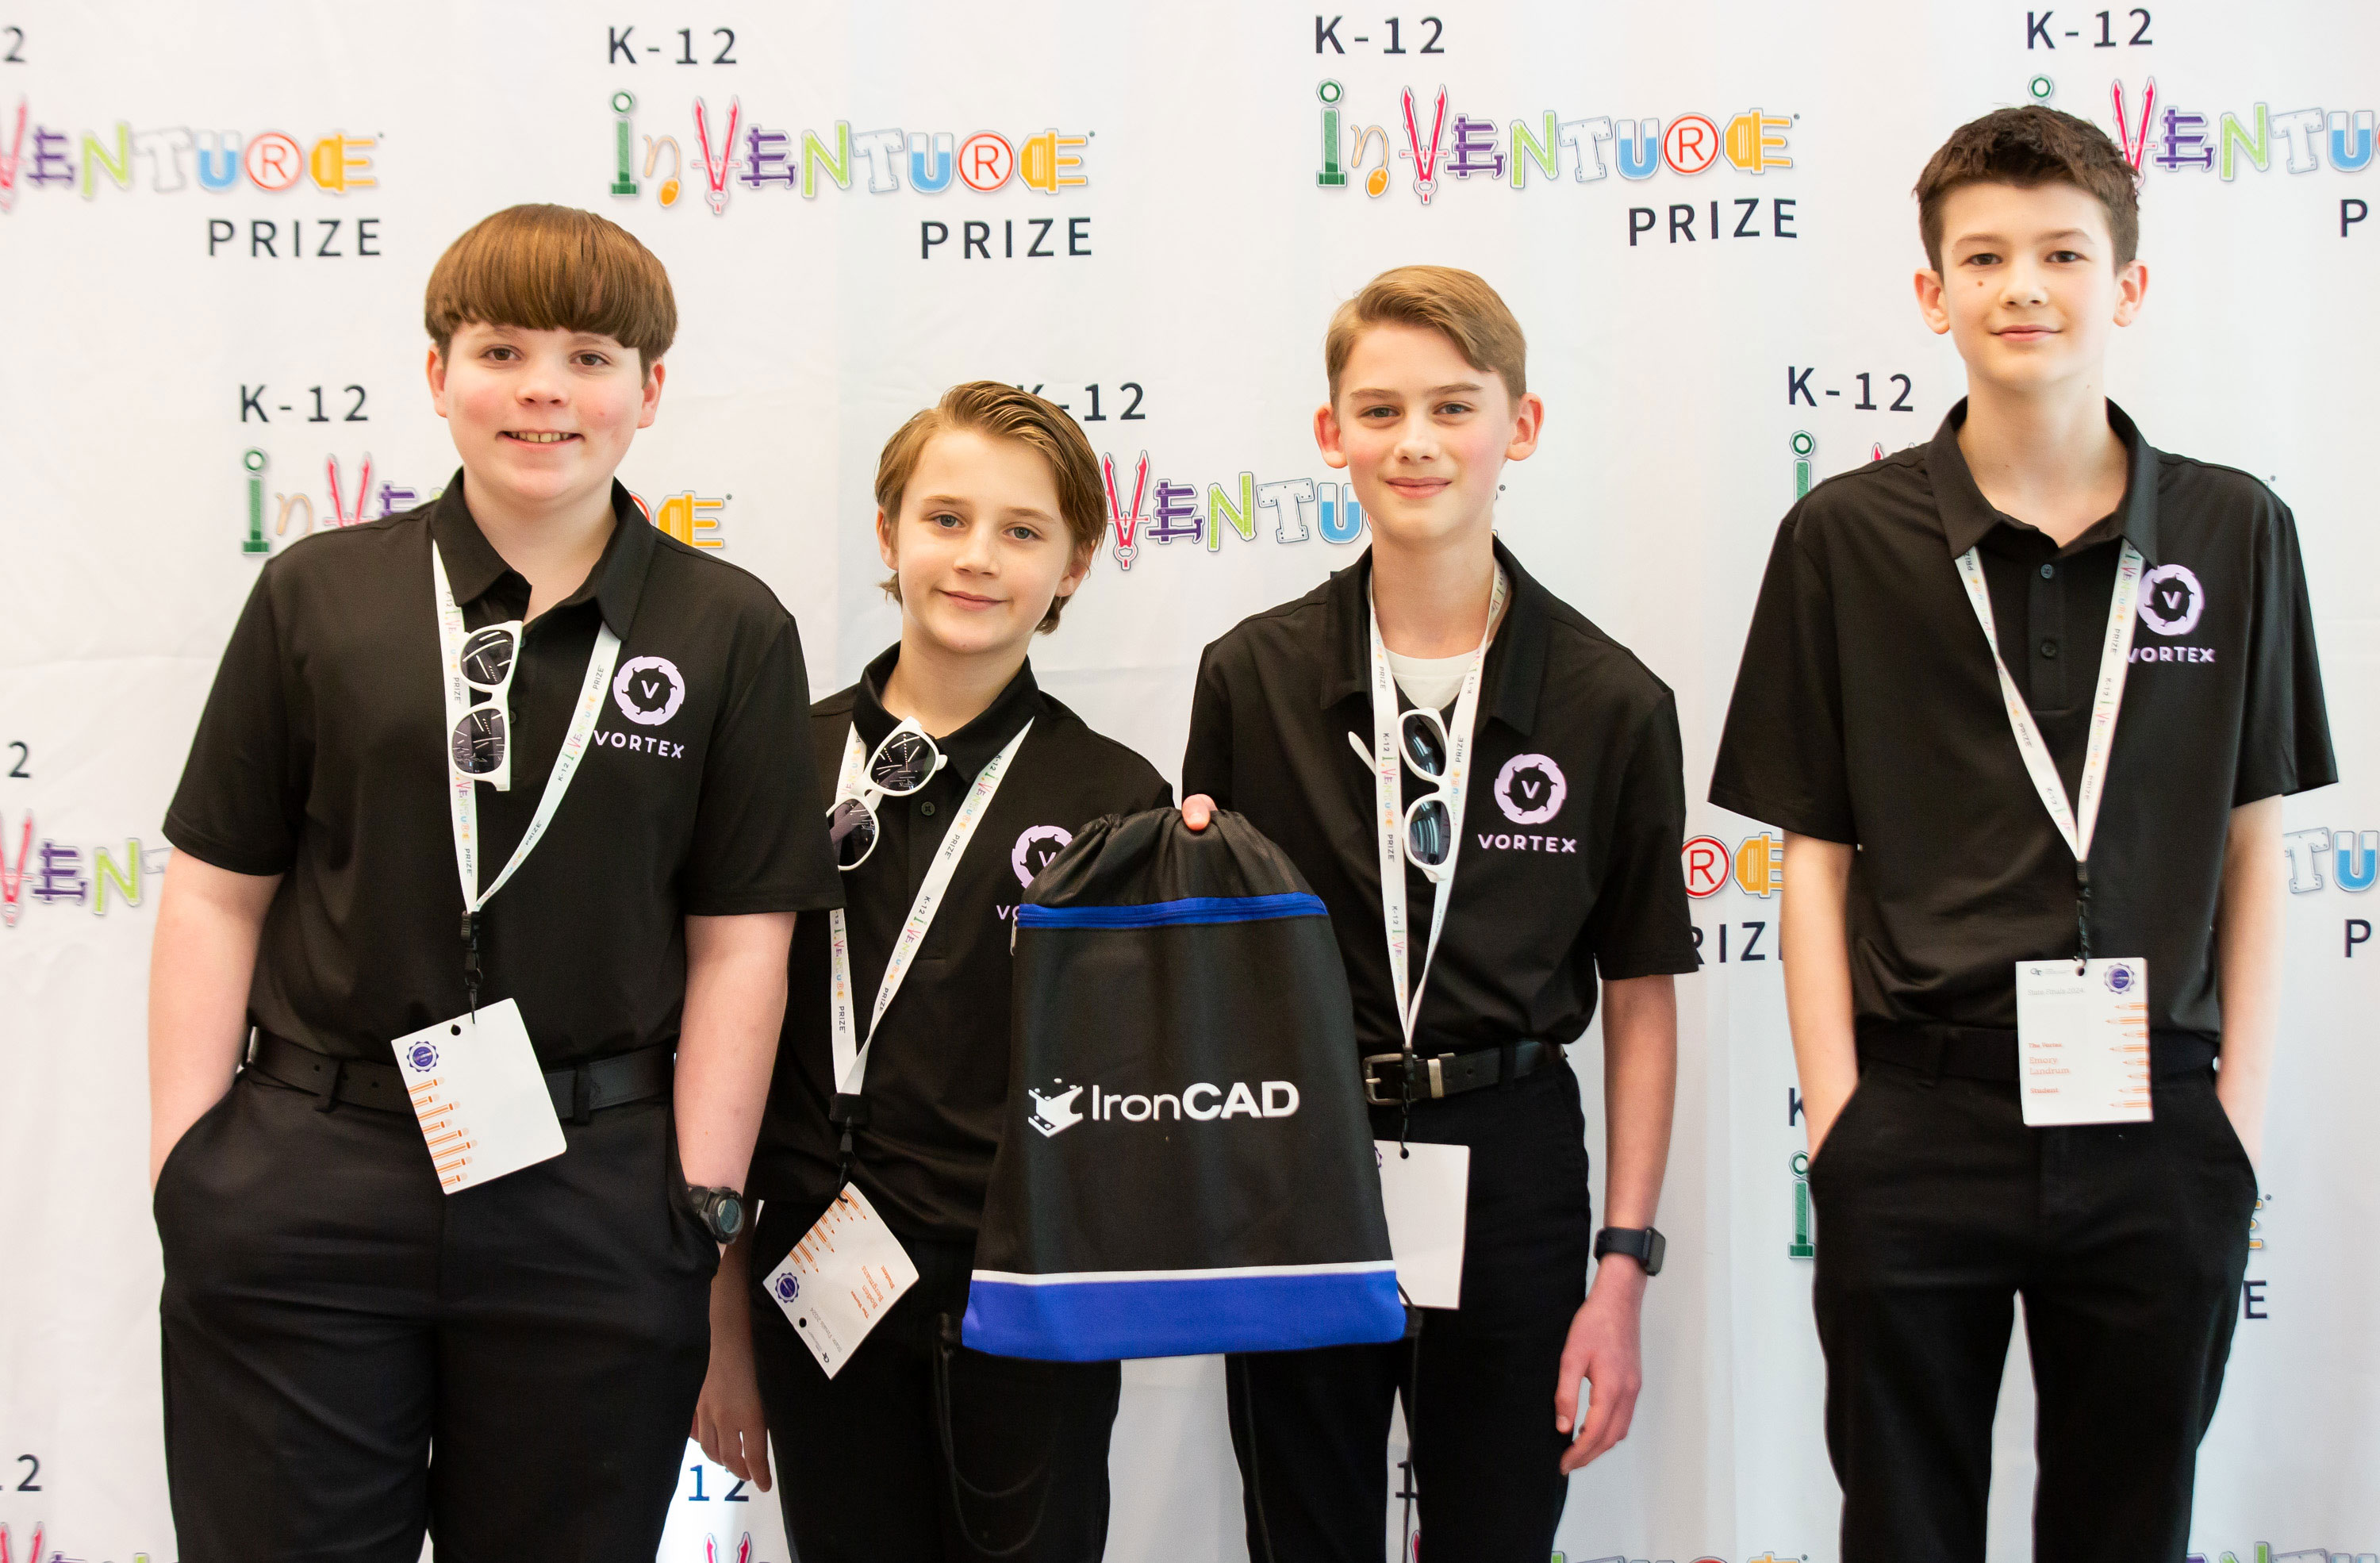 Four smiling students holding an IronCAD bag